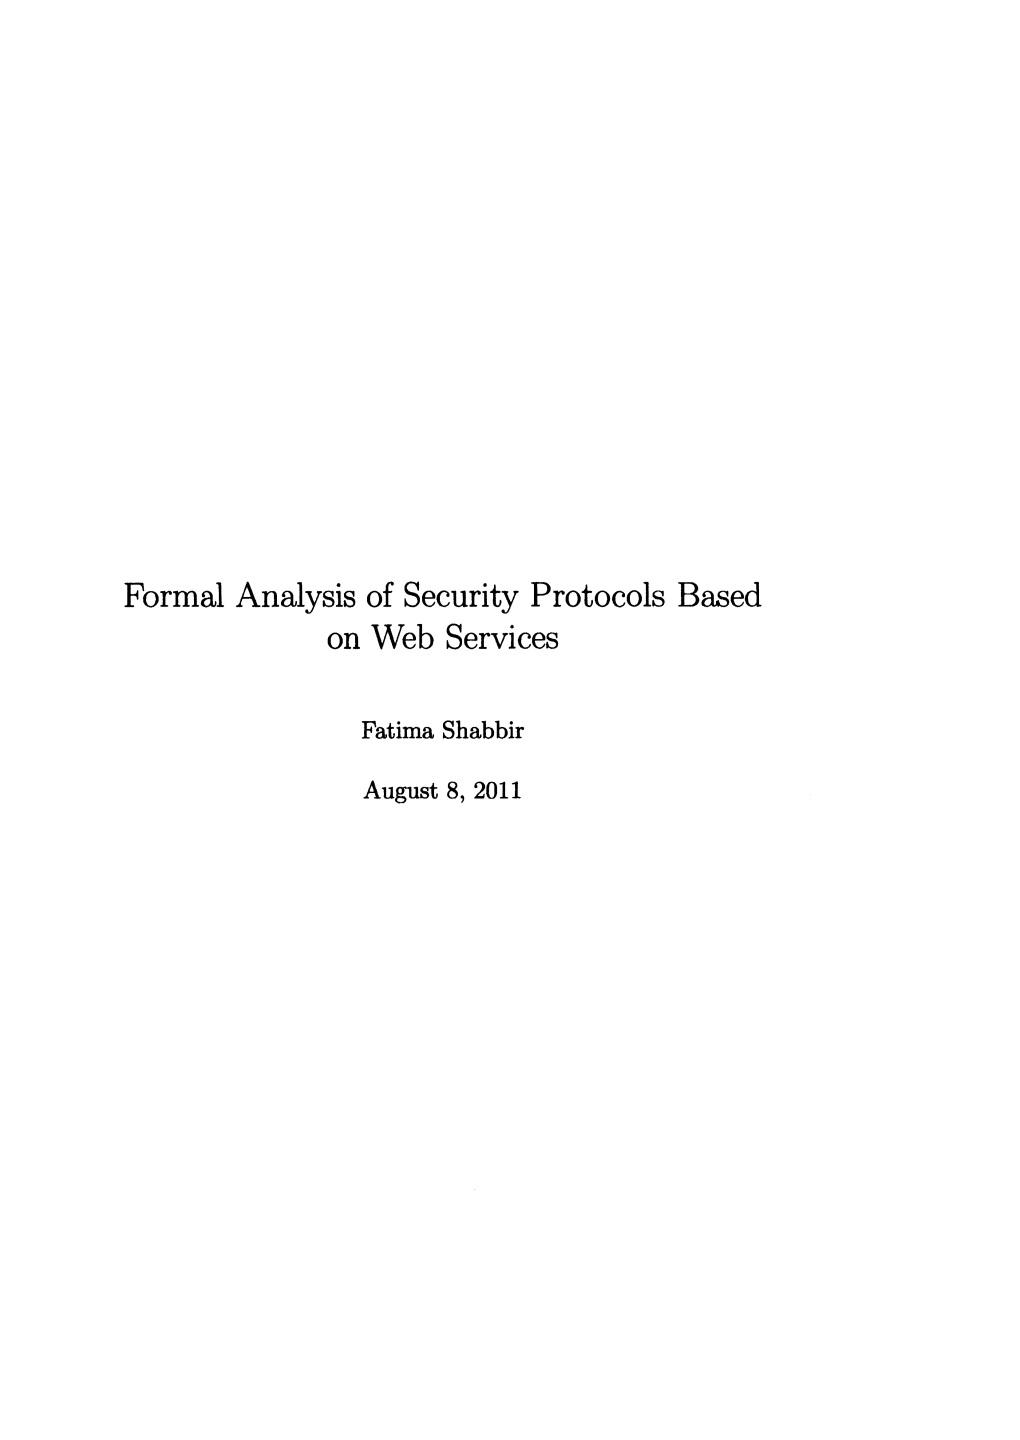 Formal Analysis of Security Protocols Based on Web Services